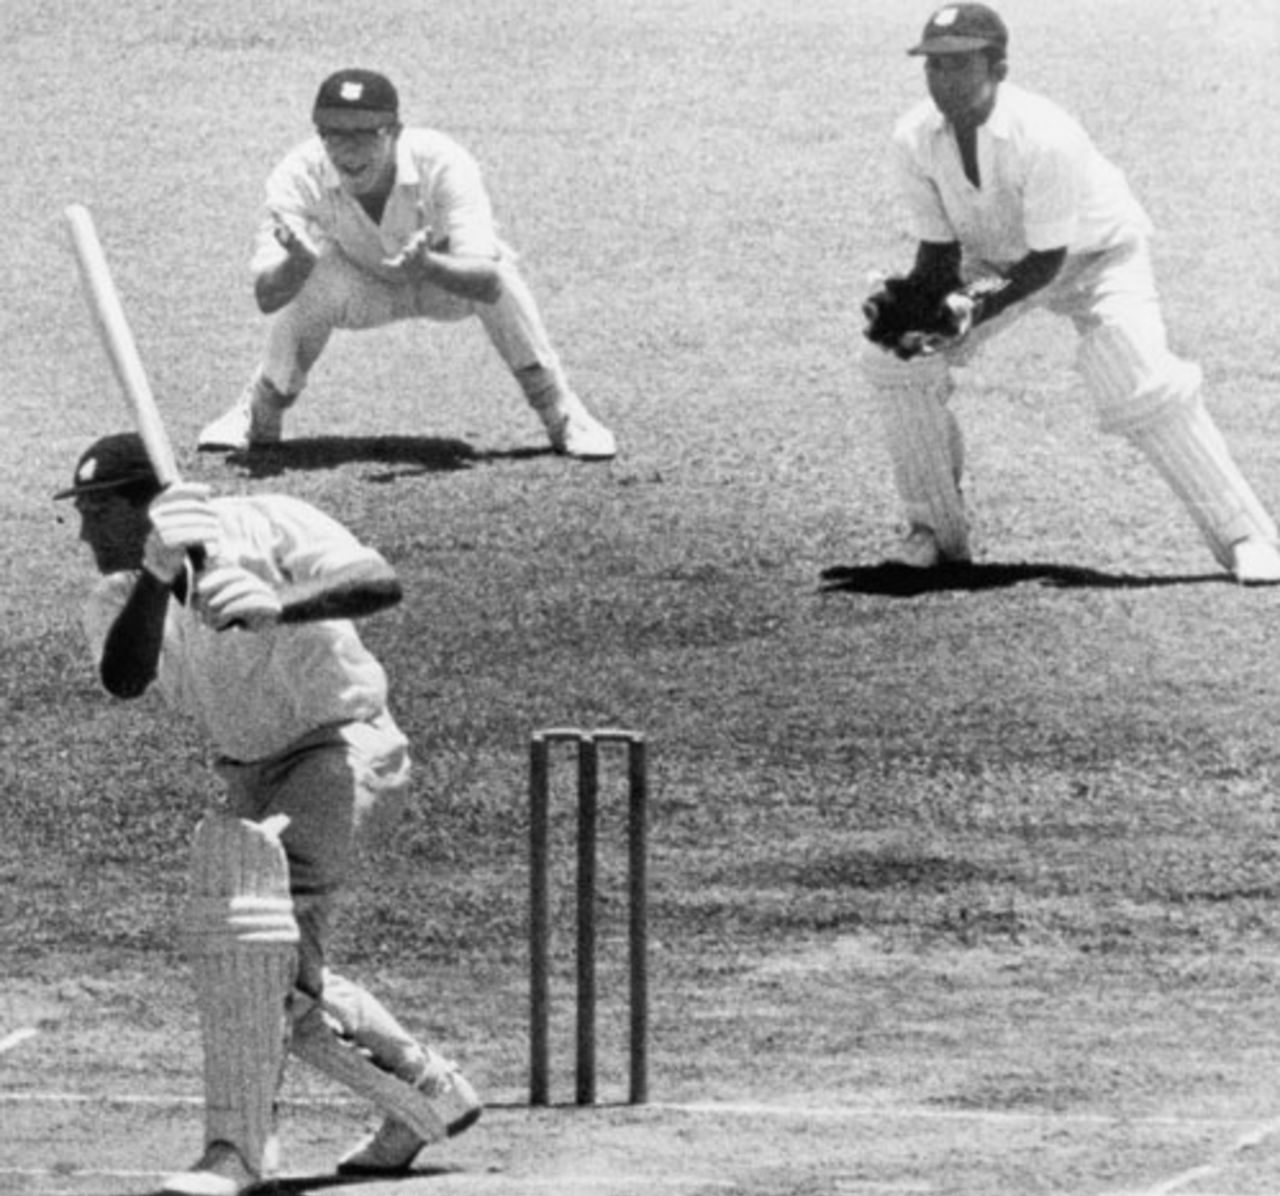 Tony Lock drives during his brief stay at the crease, West Indies v England, 5th Test, Georgetown, 5th day, April 3, 1968